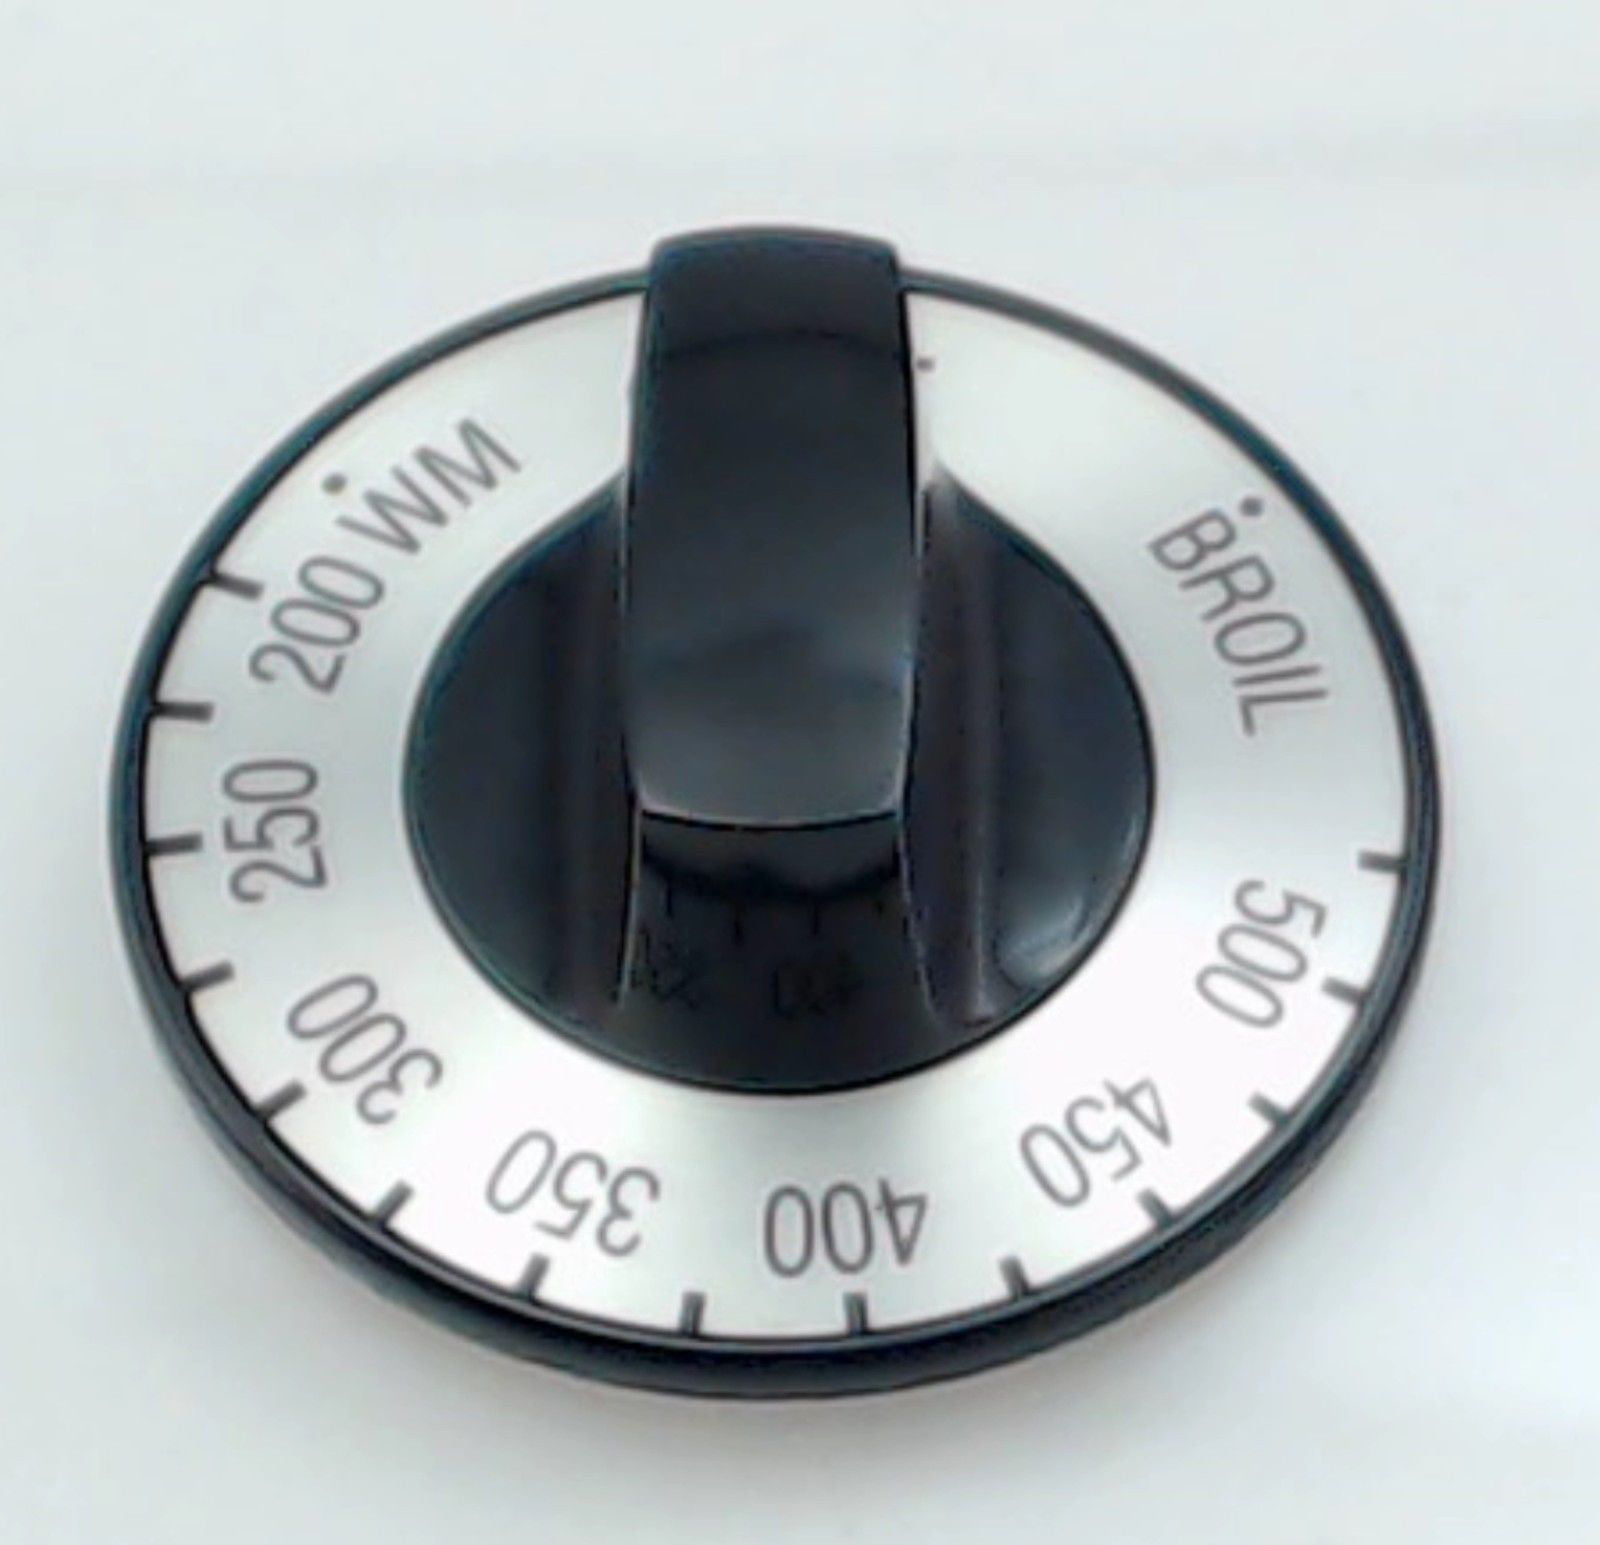 Hotpoint Oven Cooker Hob Control Knob Genuine Temperature Thermostat Silver Dial 